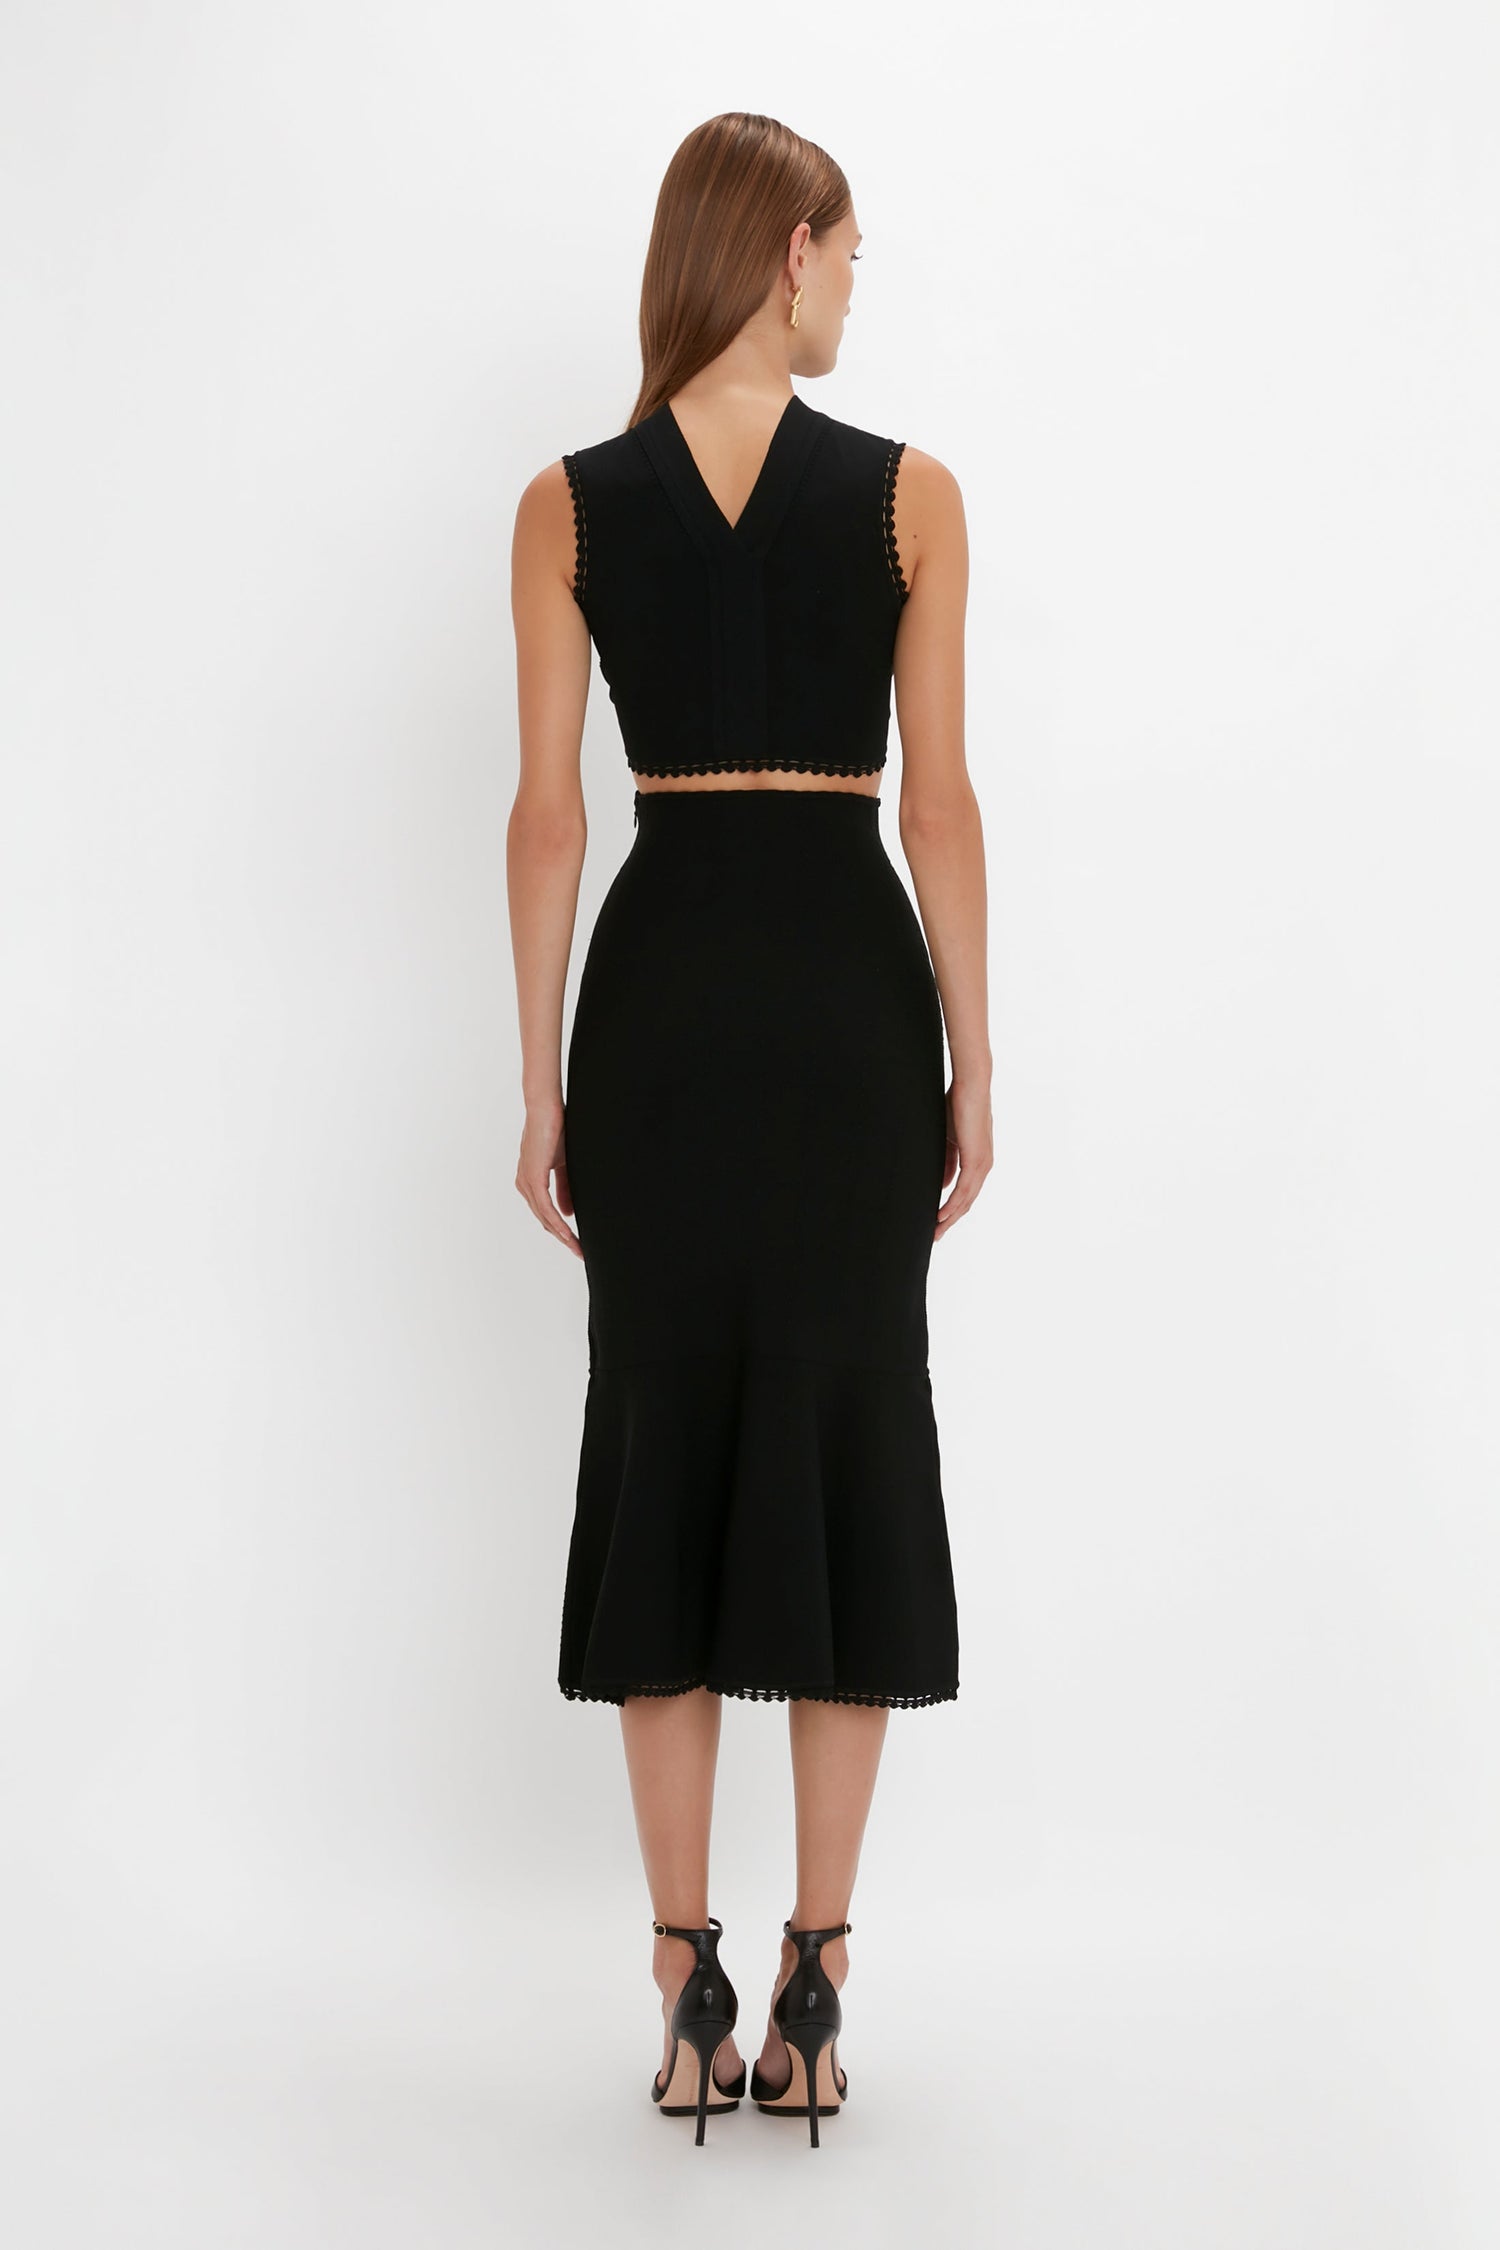 A person with long hair is shown from the back wearing a black, sleeveless, V-neck crop top paired with a high-waisted VB Body Scallop Trim Flared Skirt In Black by Victoria Beckham. They complete the look with black high-heeled shoes.